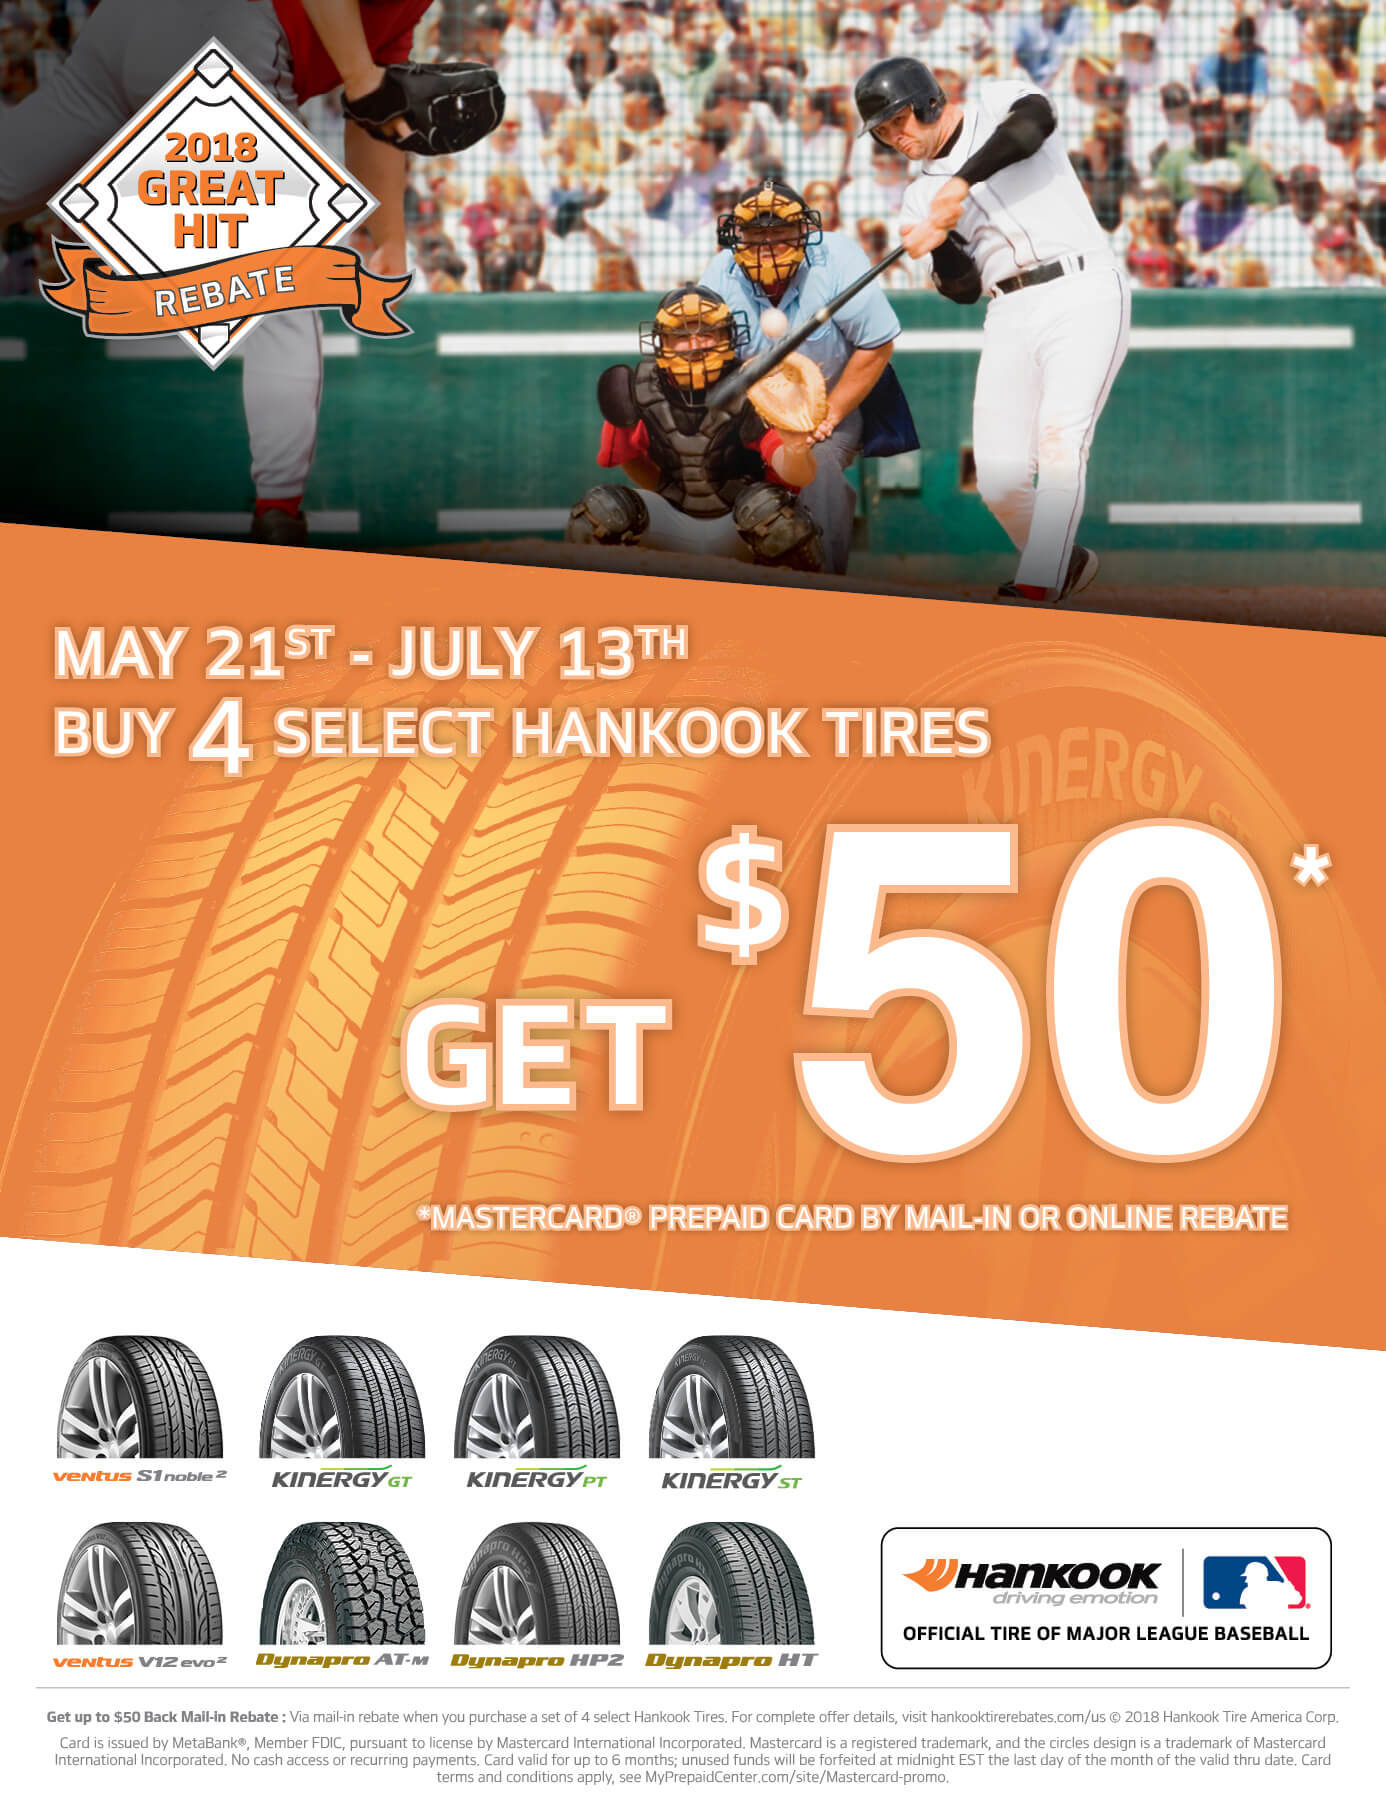 get-a-50-online-or-mail-in-rebate-on-hankook-tires-kubly-s-automotive